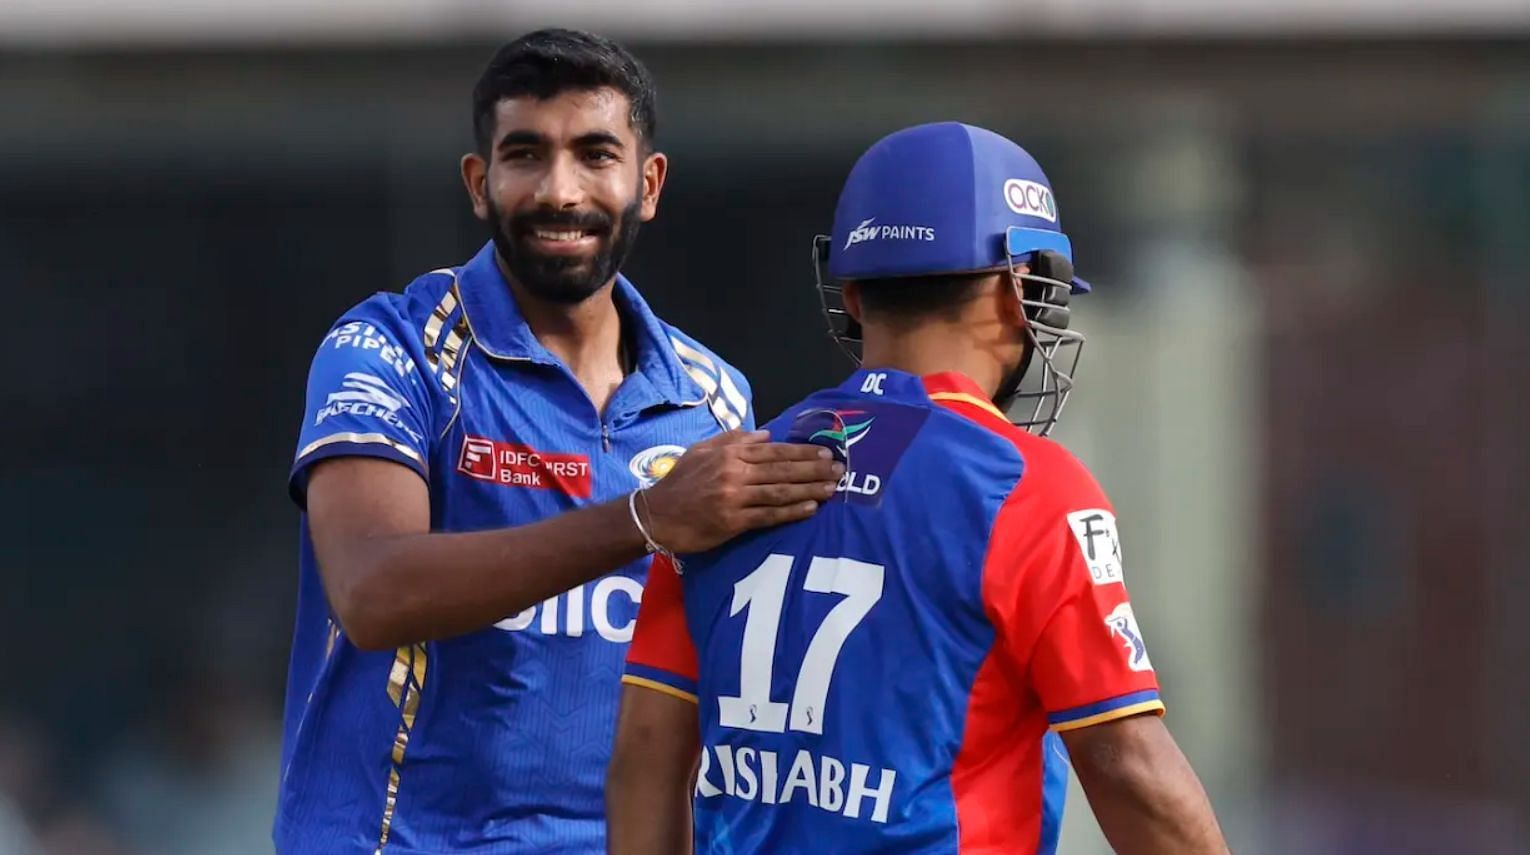 Most expensive overs of Jasprit Bumrah in IPL (Image: BCCI/IPL)